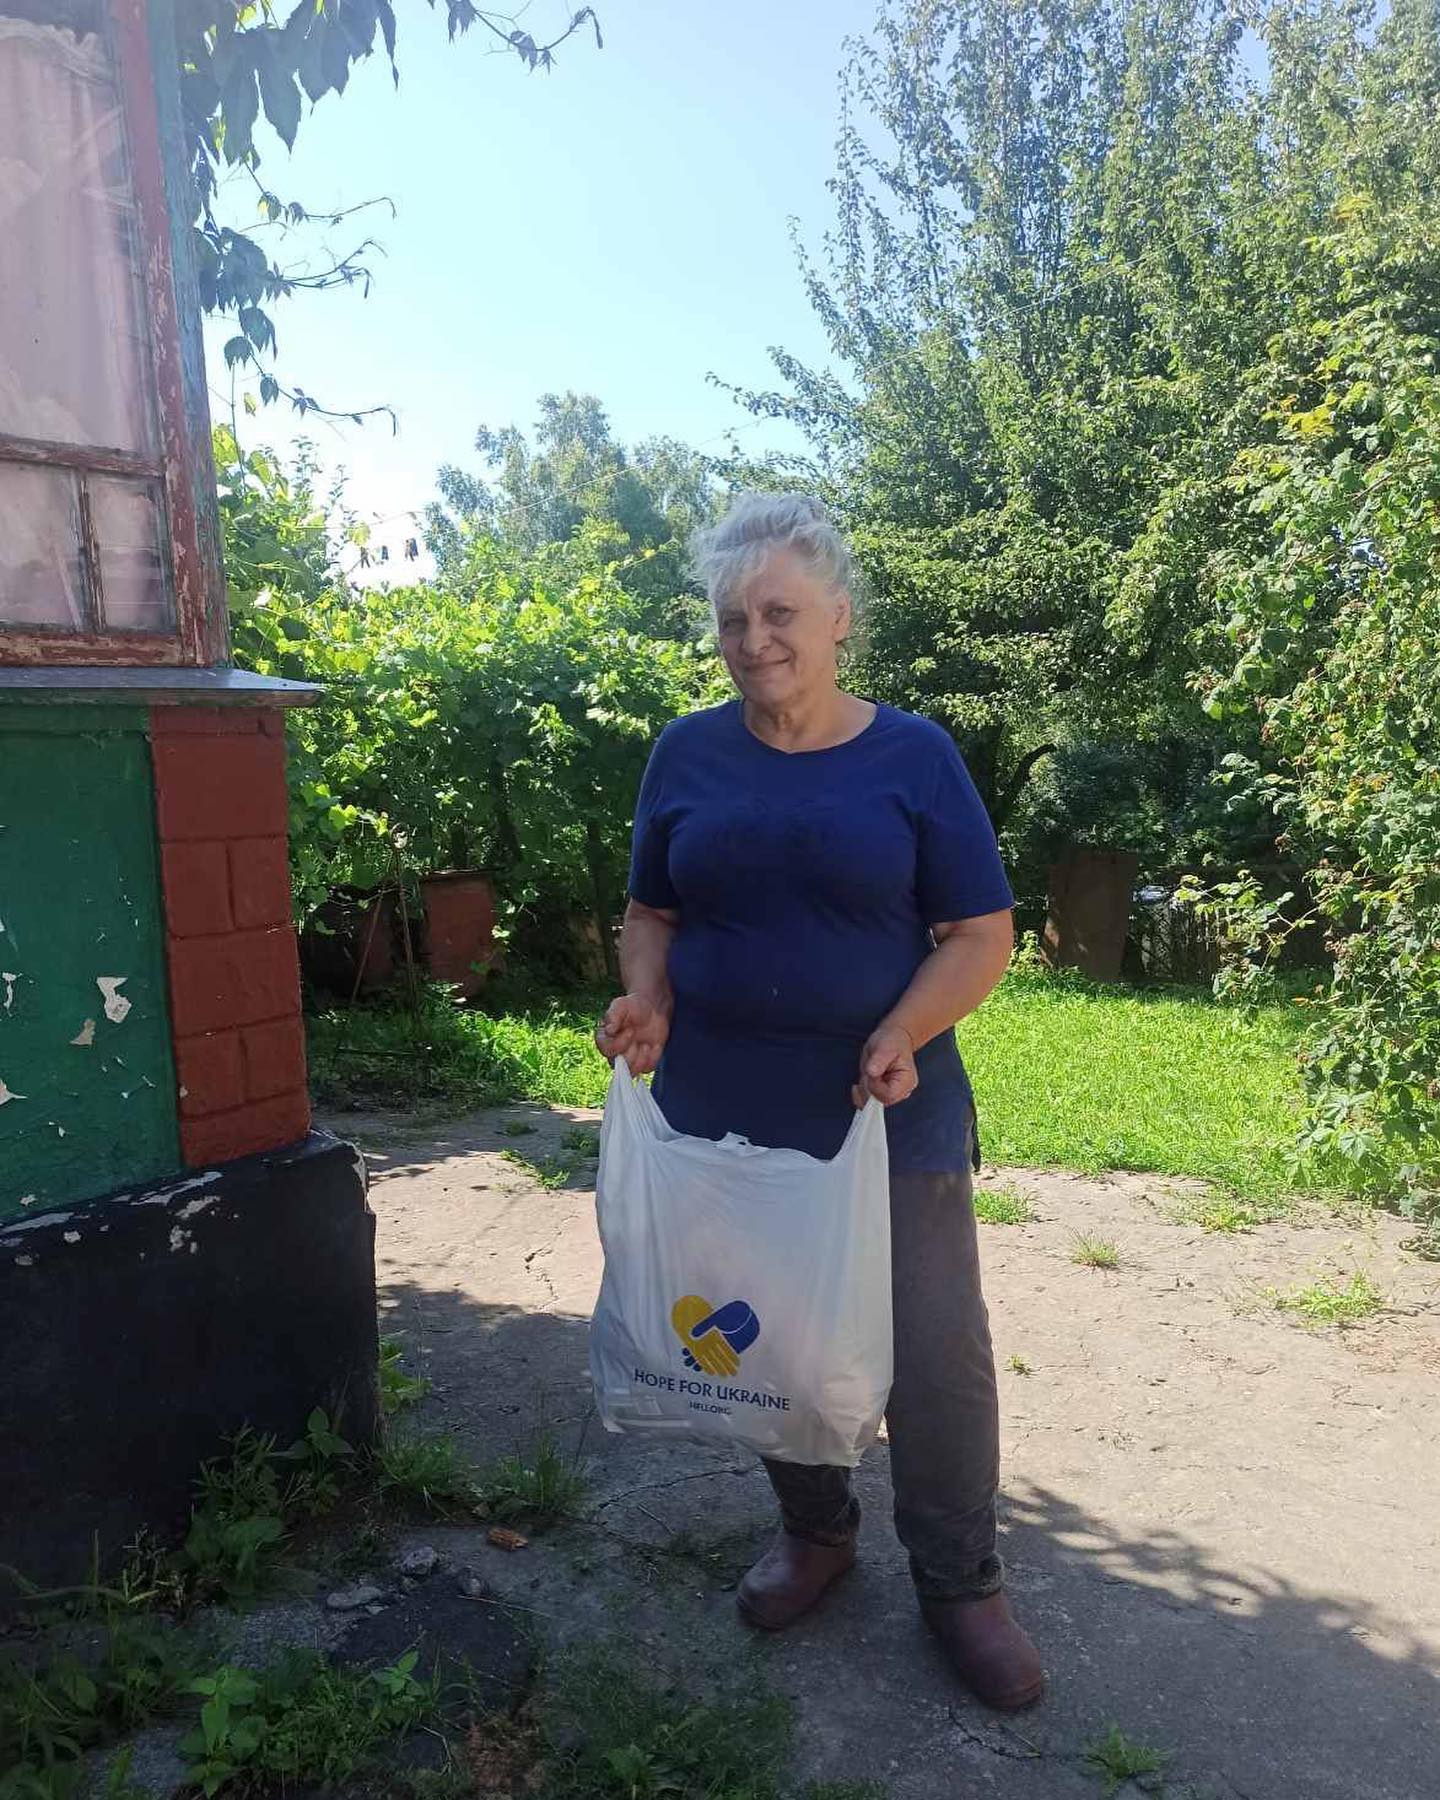 A woman holding a shopping bag in front of a house.